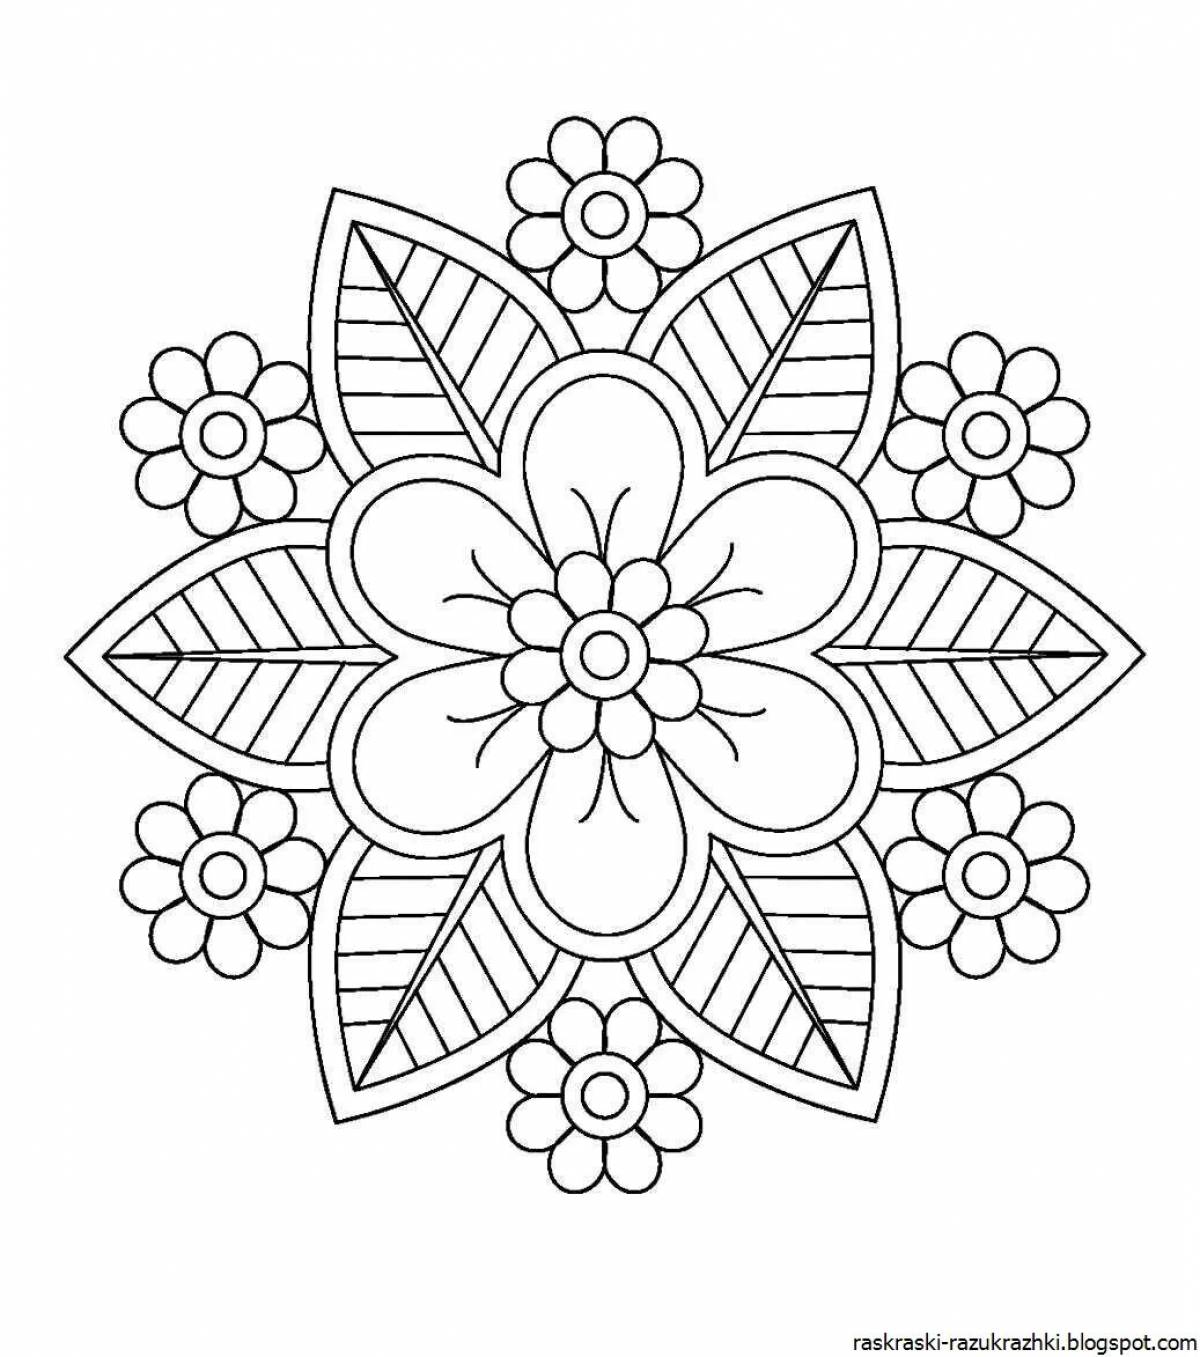 Fun flower coloring pages